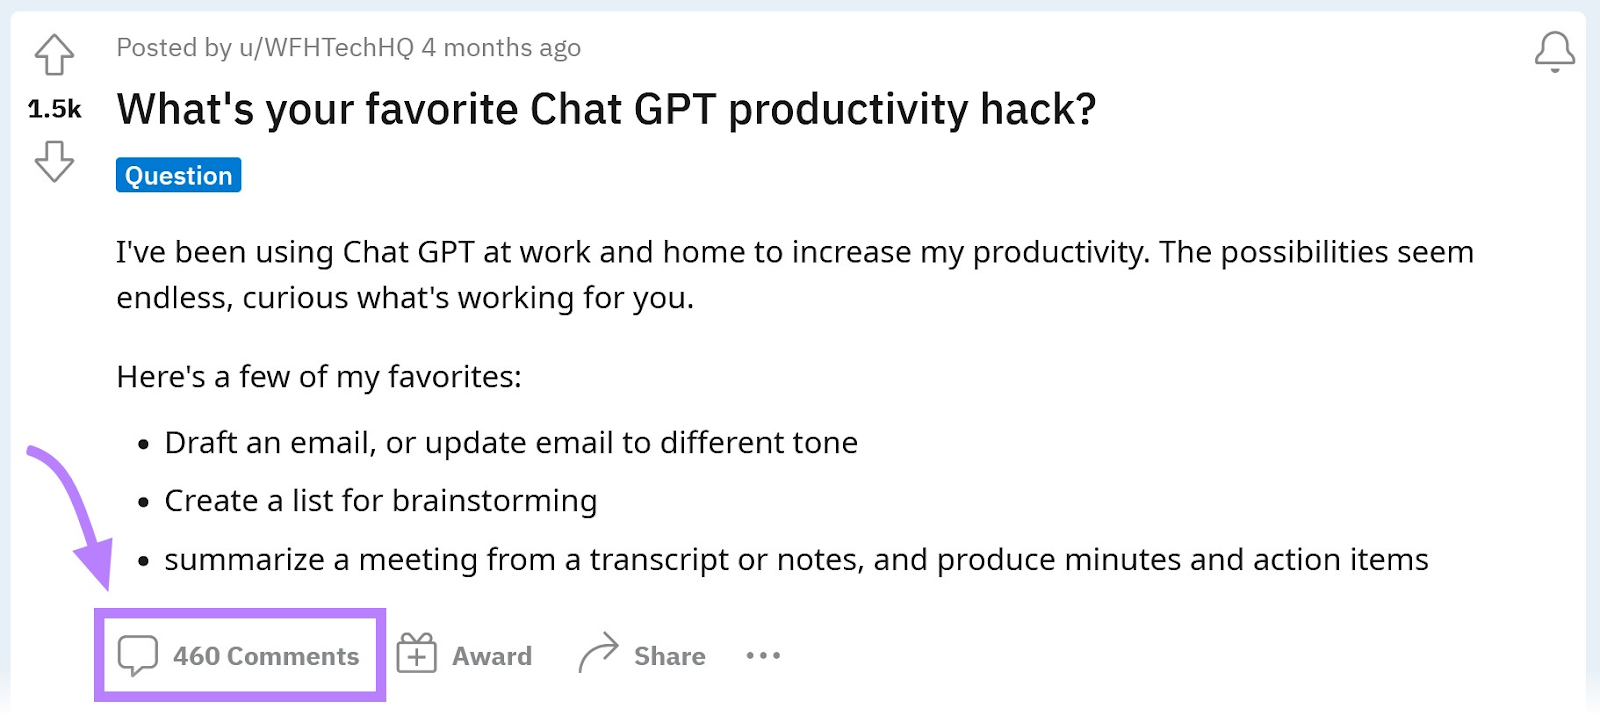 an example of a post from Reddit on "What’s your favorite Chat GPT productivity hack?" showing the number of comments it has